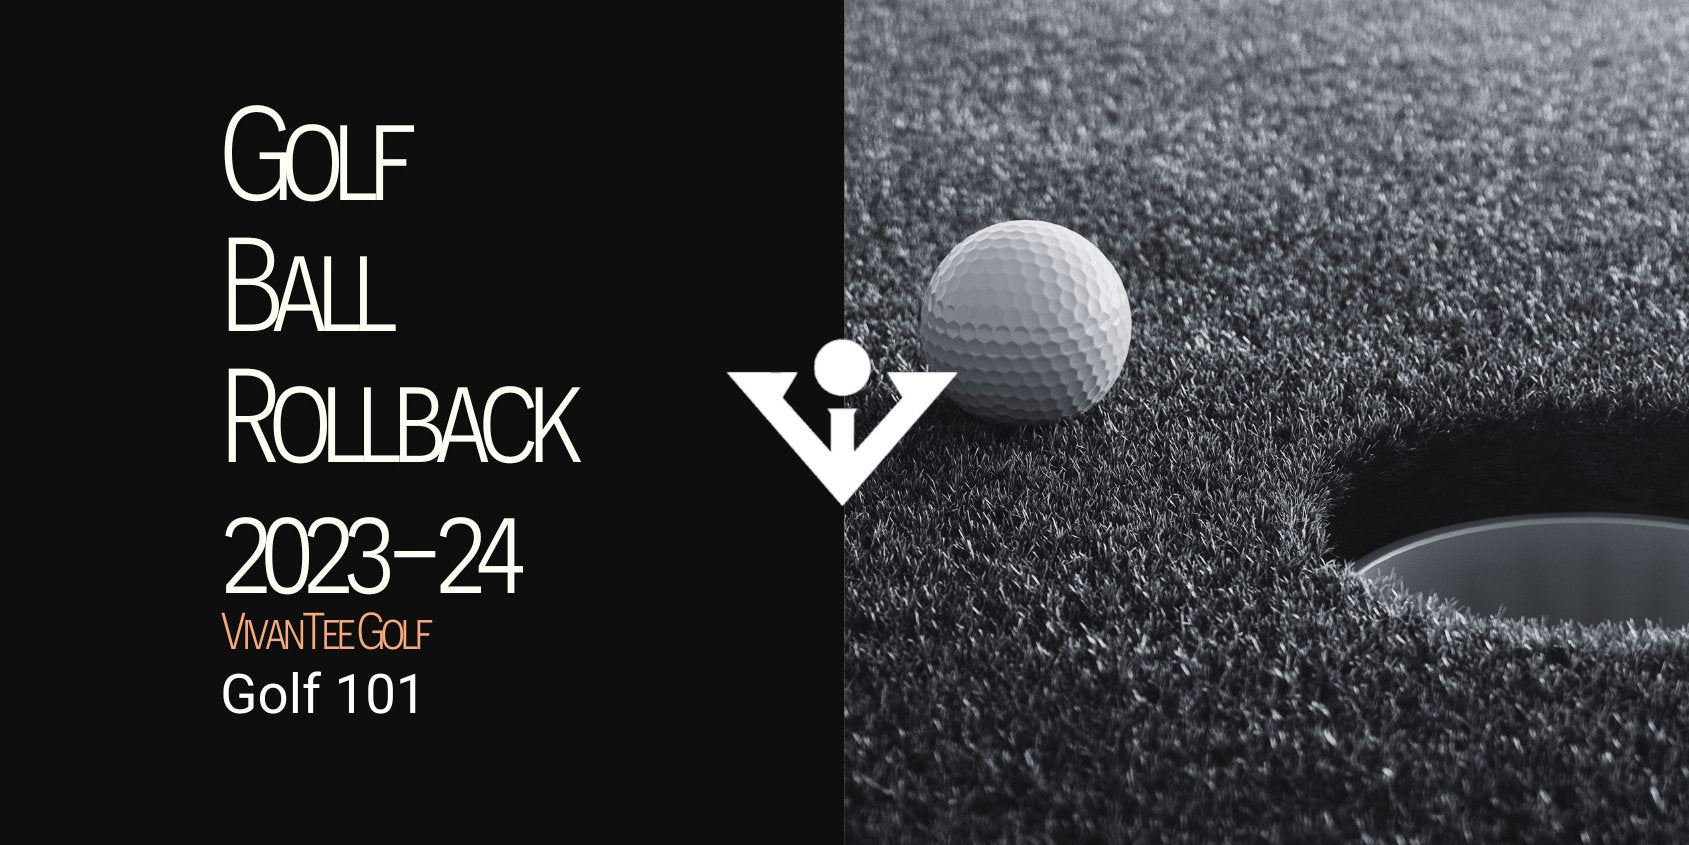 Golf ball next to a hole in black and white in our signature blog banner format discussing golf ball rollback in golf.